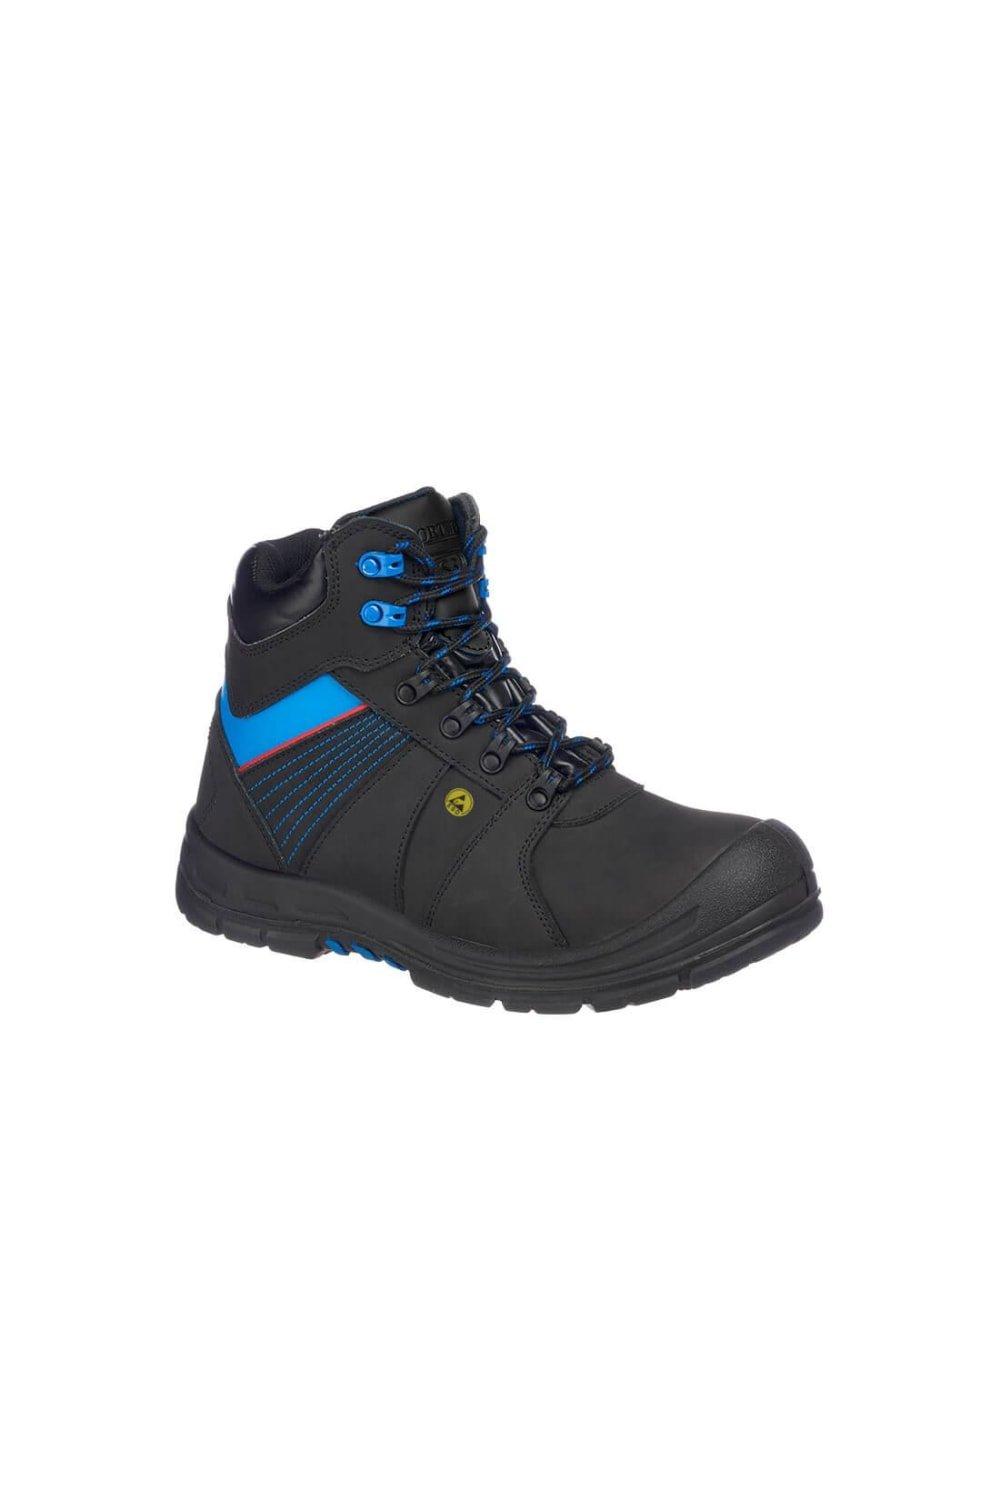 Protector Leather Compositelite Safety Boots